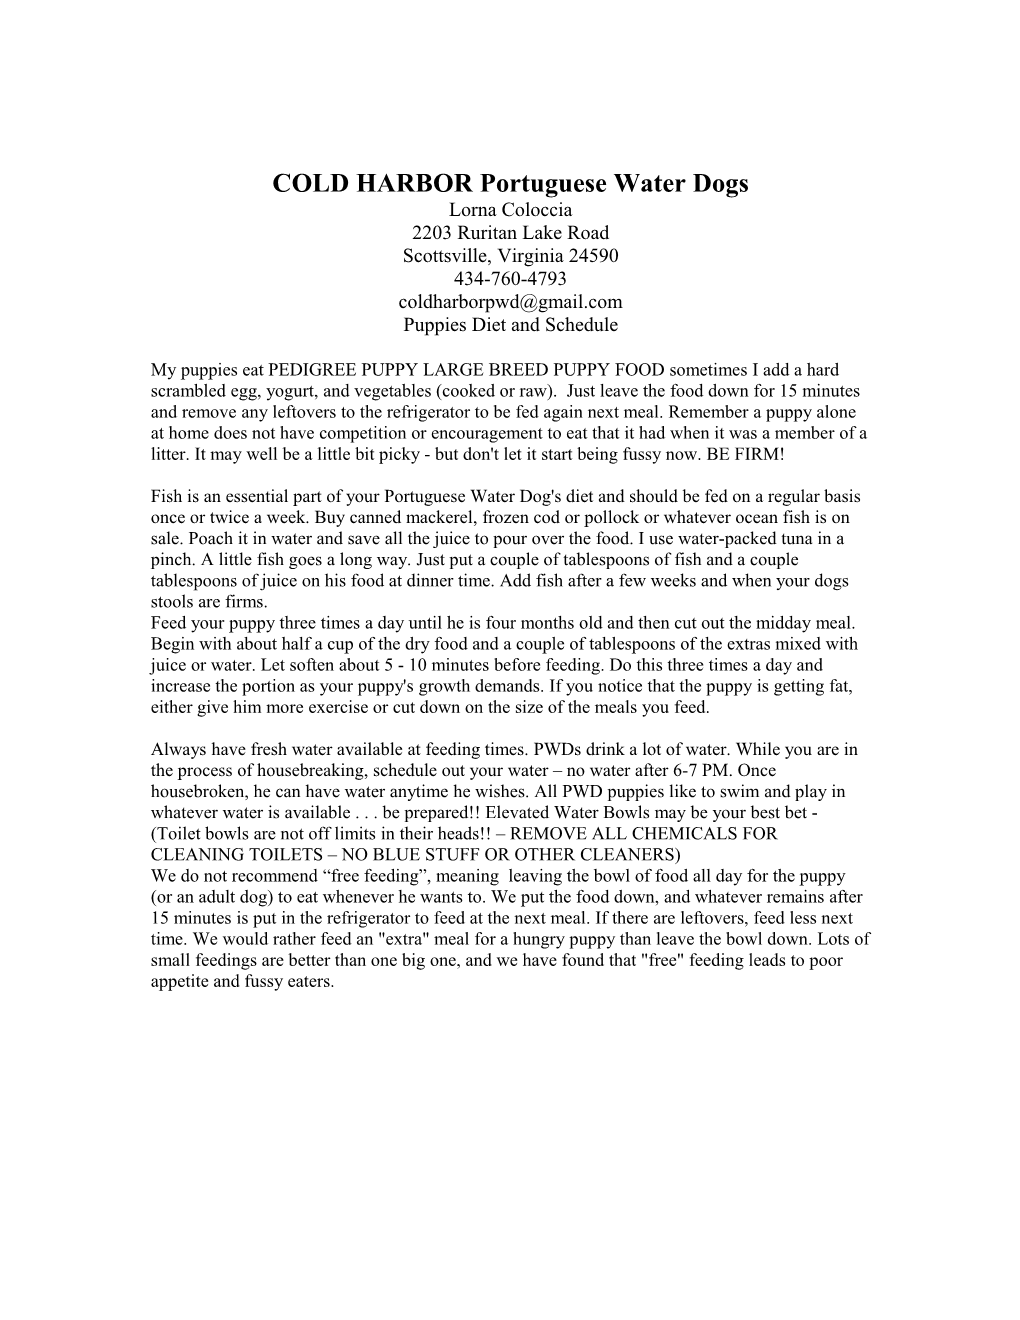 COLDHARBOR Portuguese Water Dogs